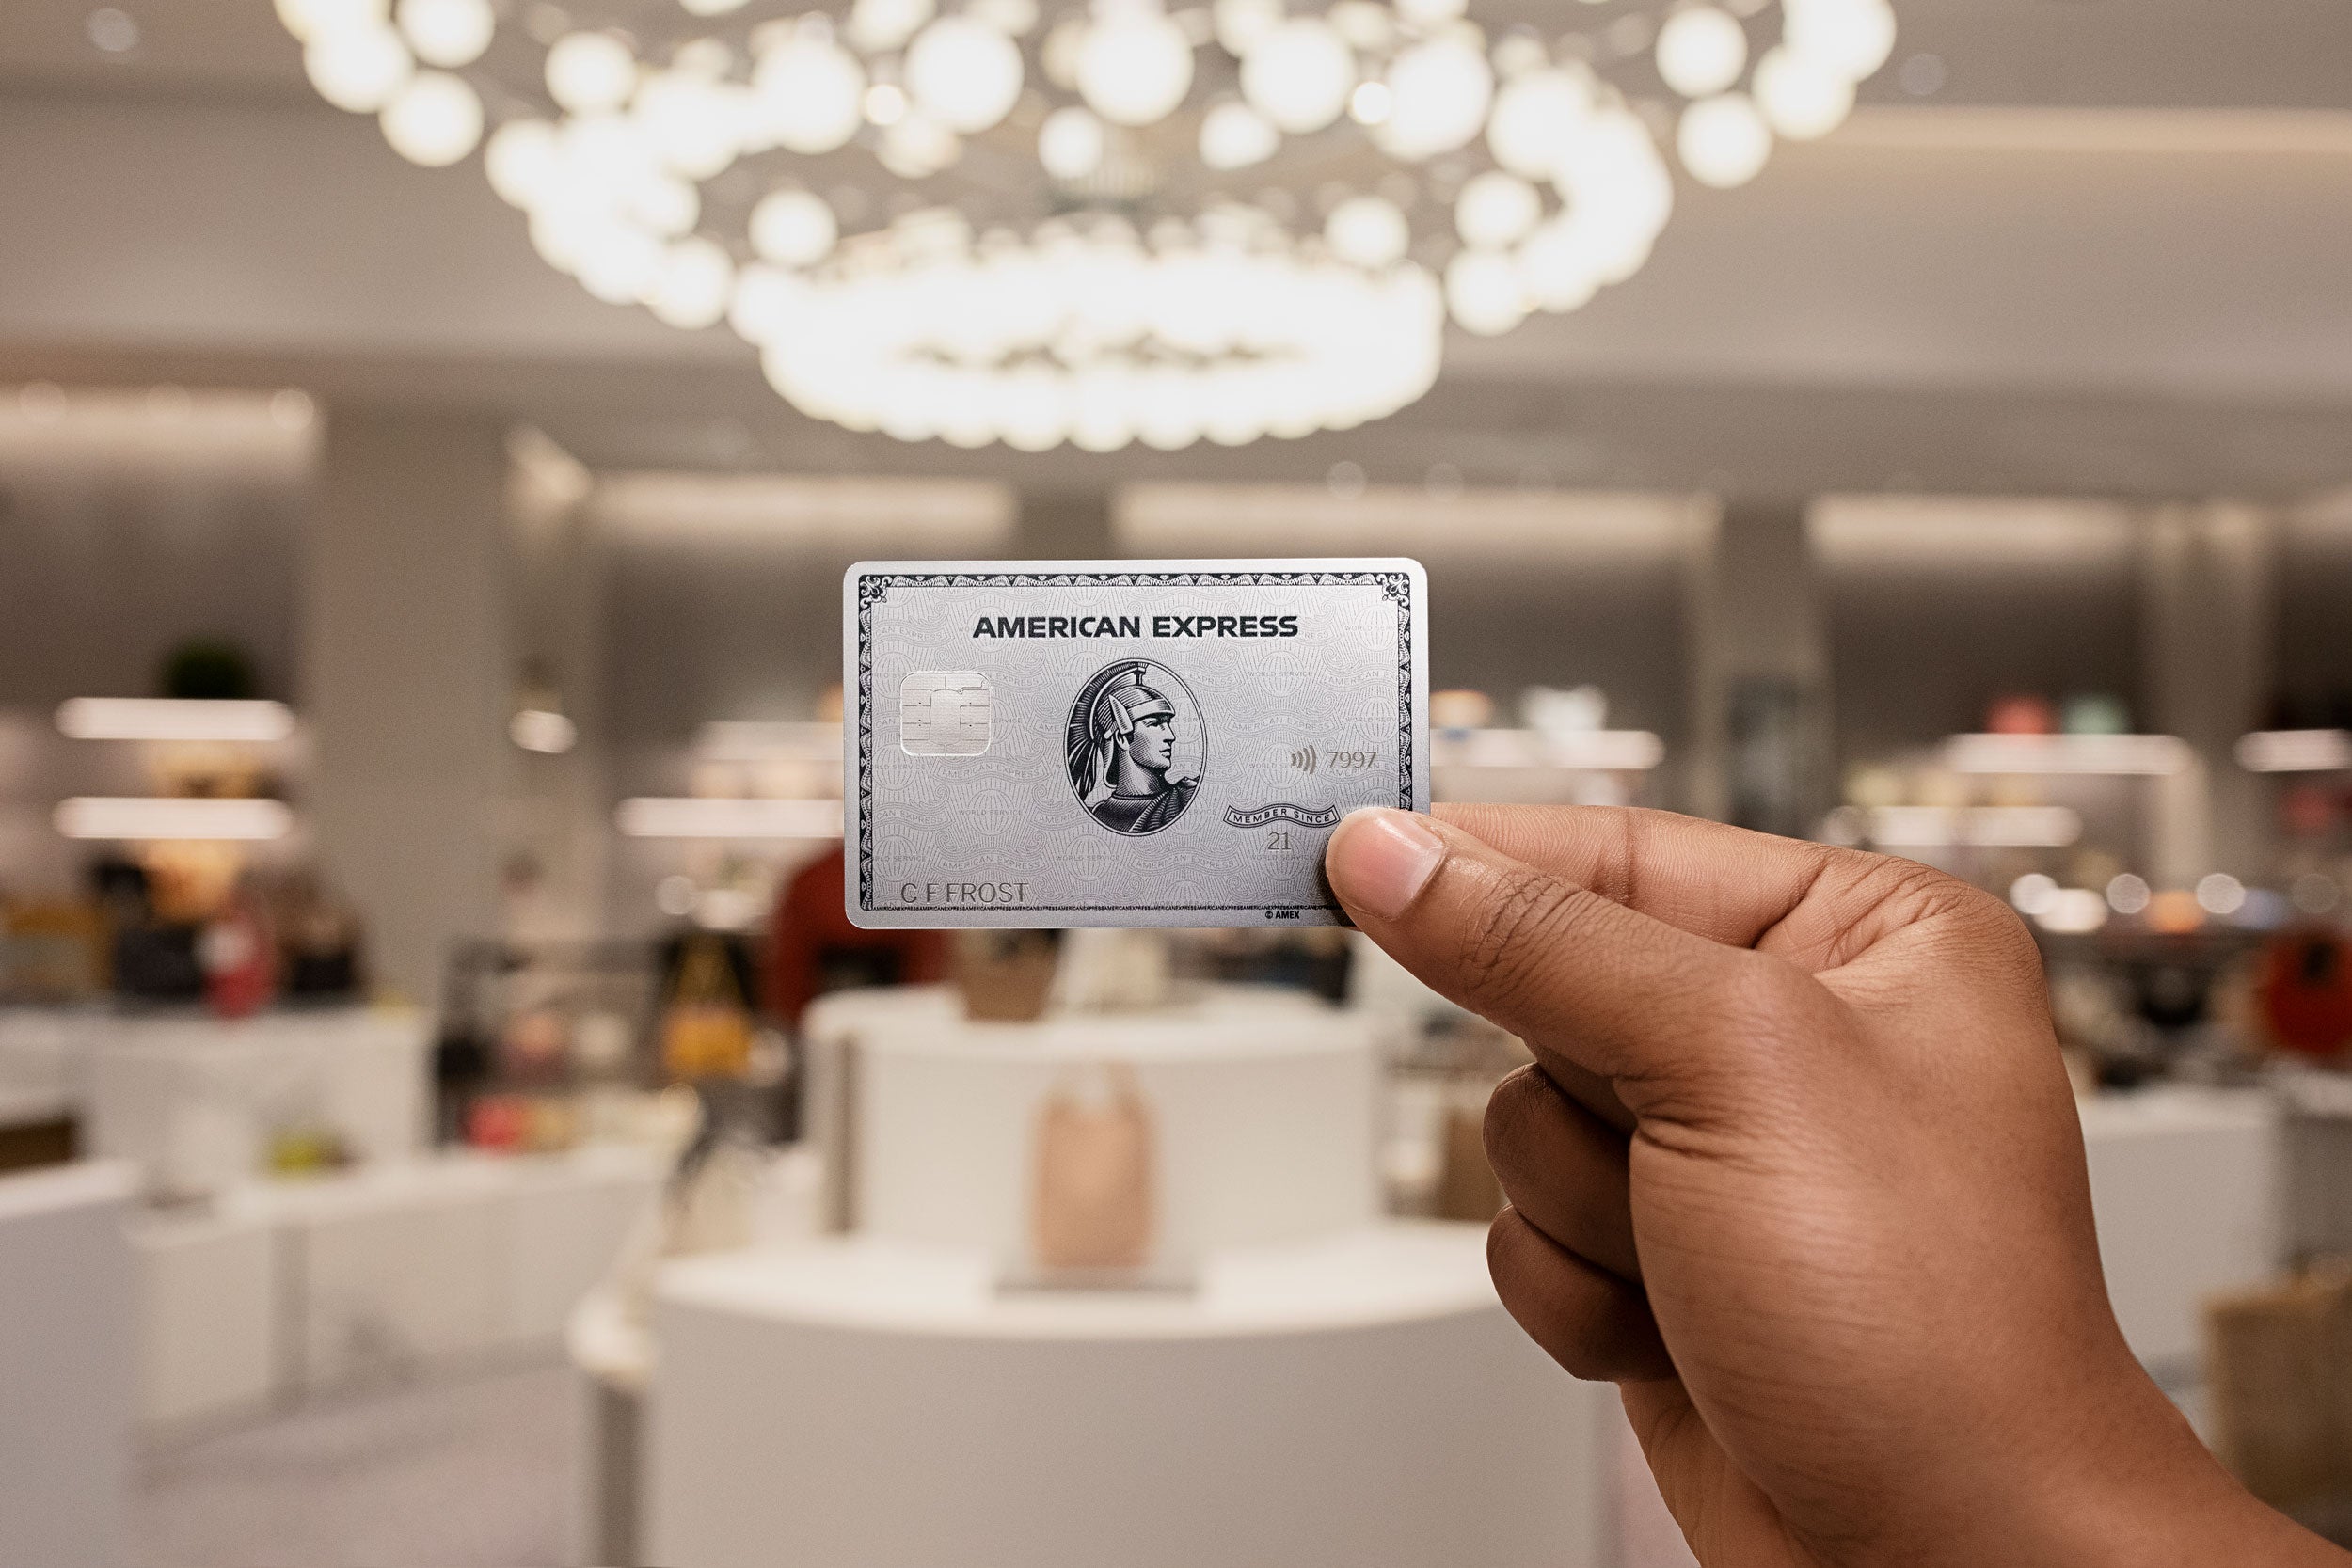 Amex Platinum Card Get Up to a 150kpoint Bonus Offer [2022]